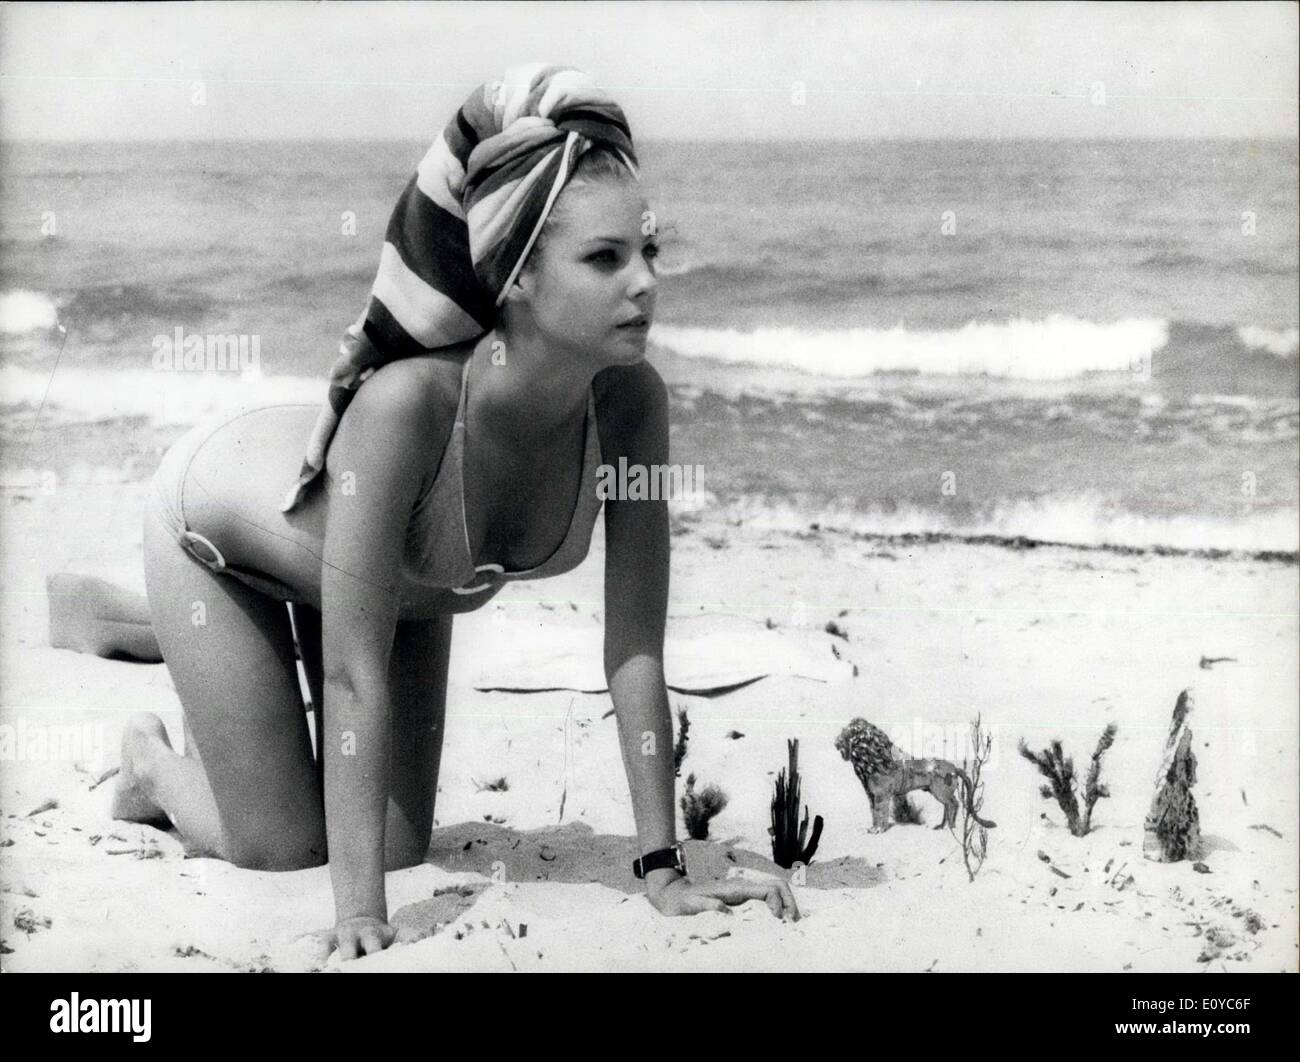 Oct. 28, 1969 - Teenage Starlet In ''Se Lily'' Sixteen-Year-Old Carole Andre Co-Stars With The Swimmer-Tuned-Actress Christine Caron In The Film ''The Sea Lily'' Now In The Making In Sardinia. Photo shows Carole Andre Pictured In A Scene On A Beach. Stock Photo